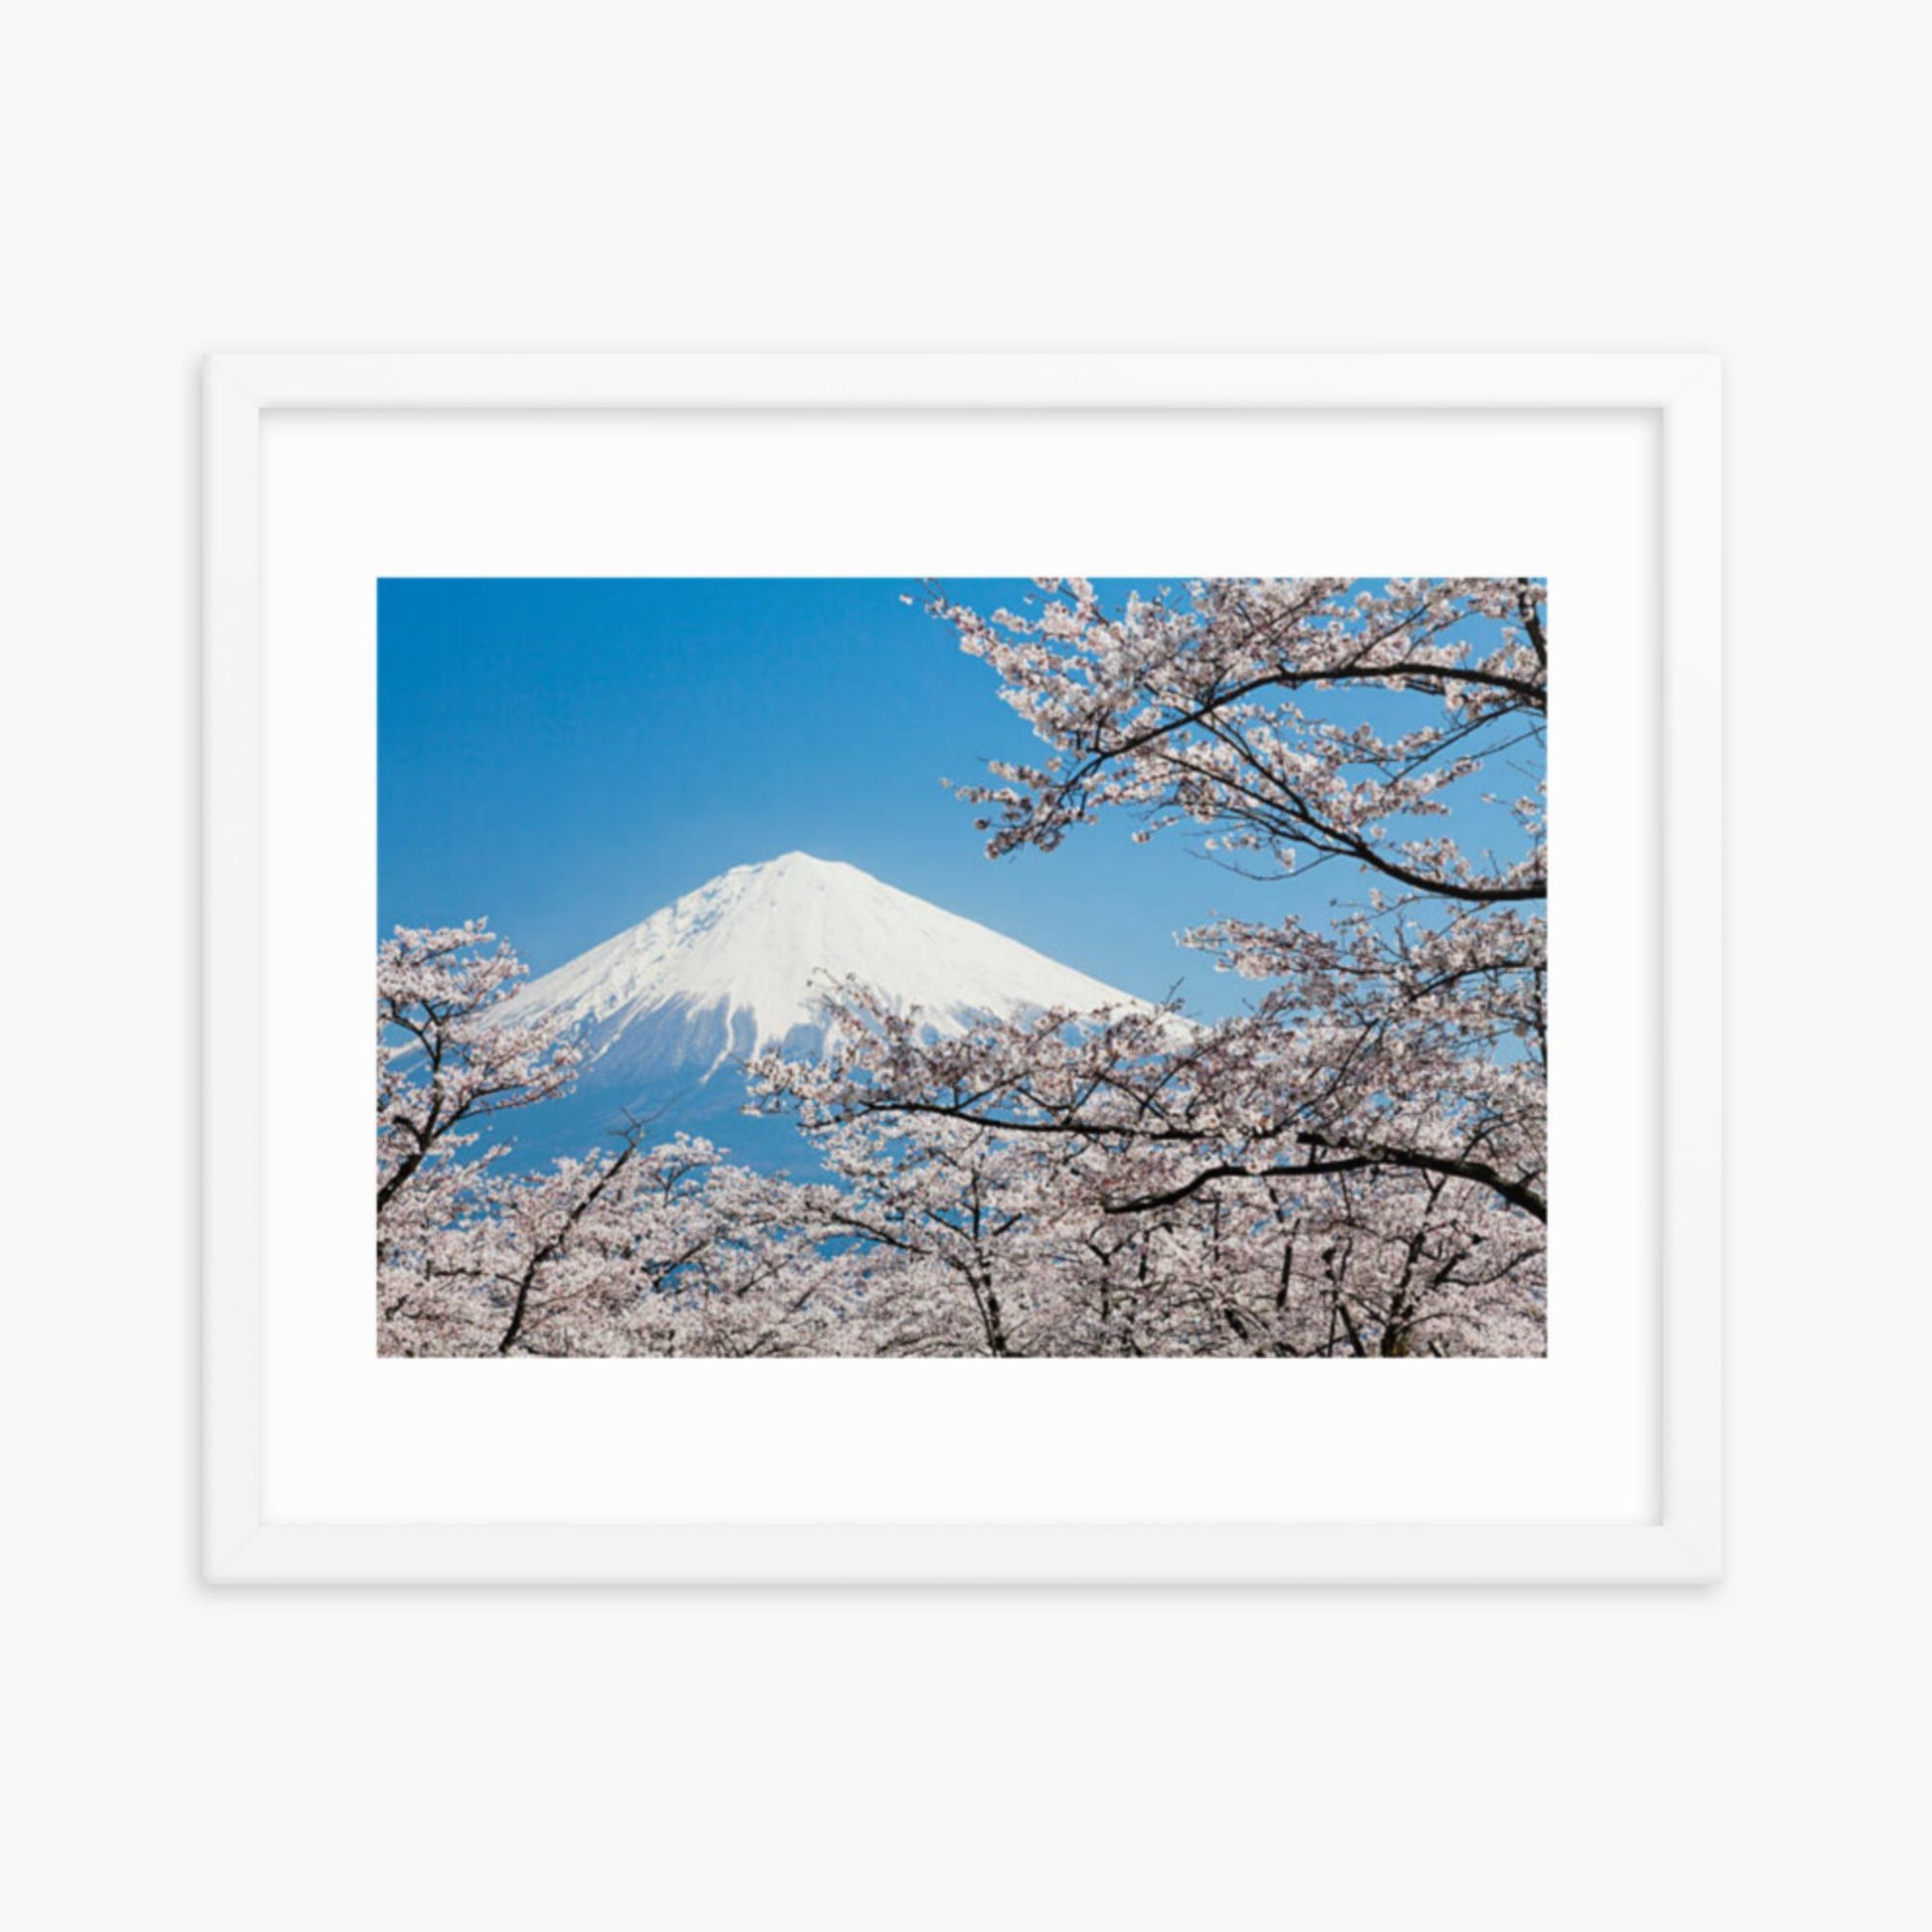 Mount Fuji & Cherry Blossoms 16x20 in Poster With White Frame